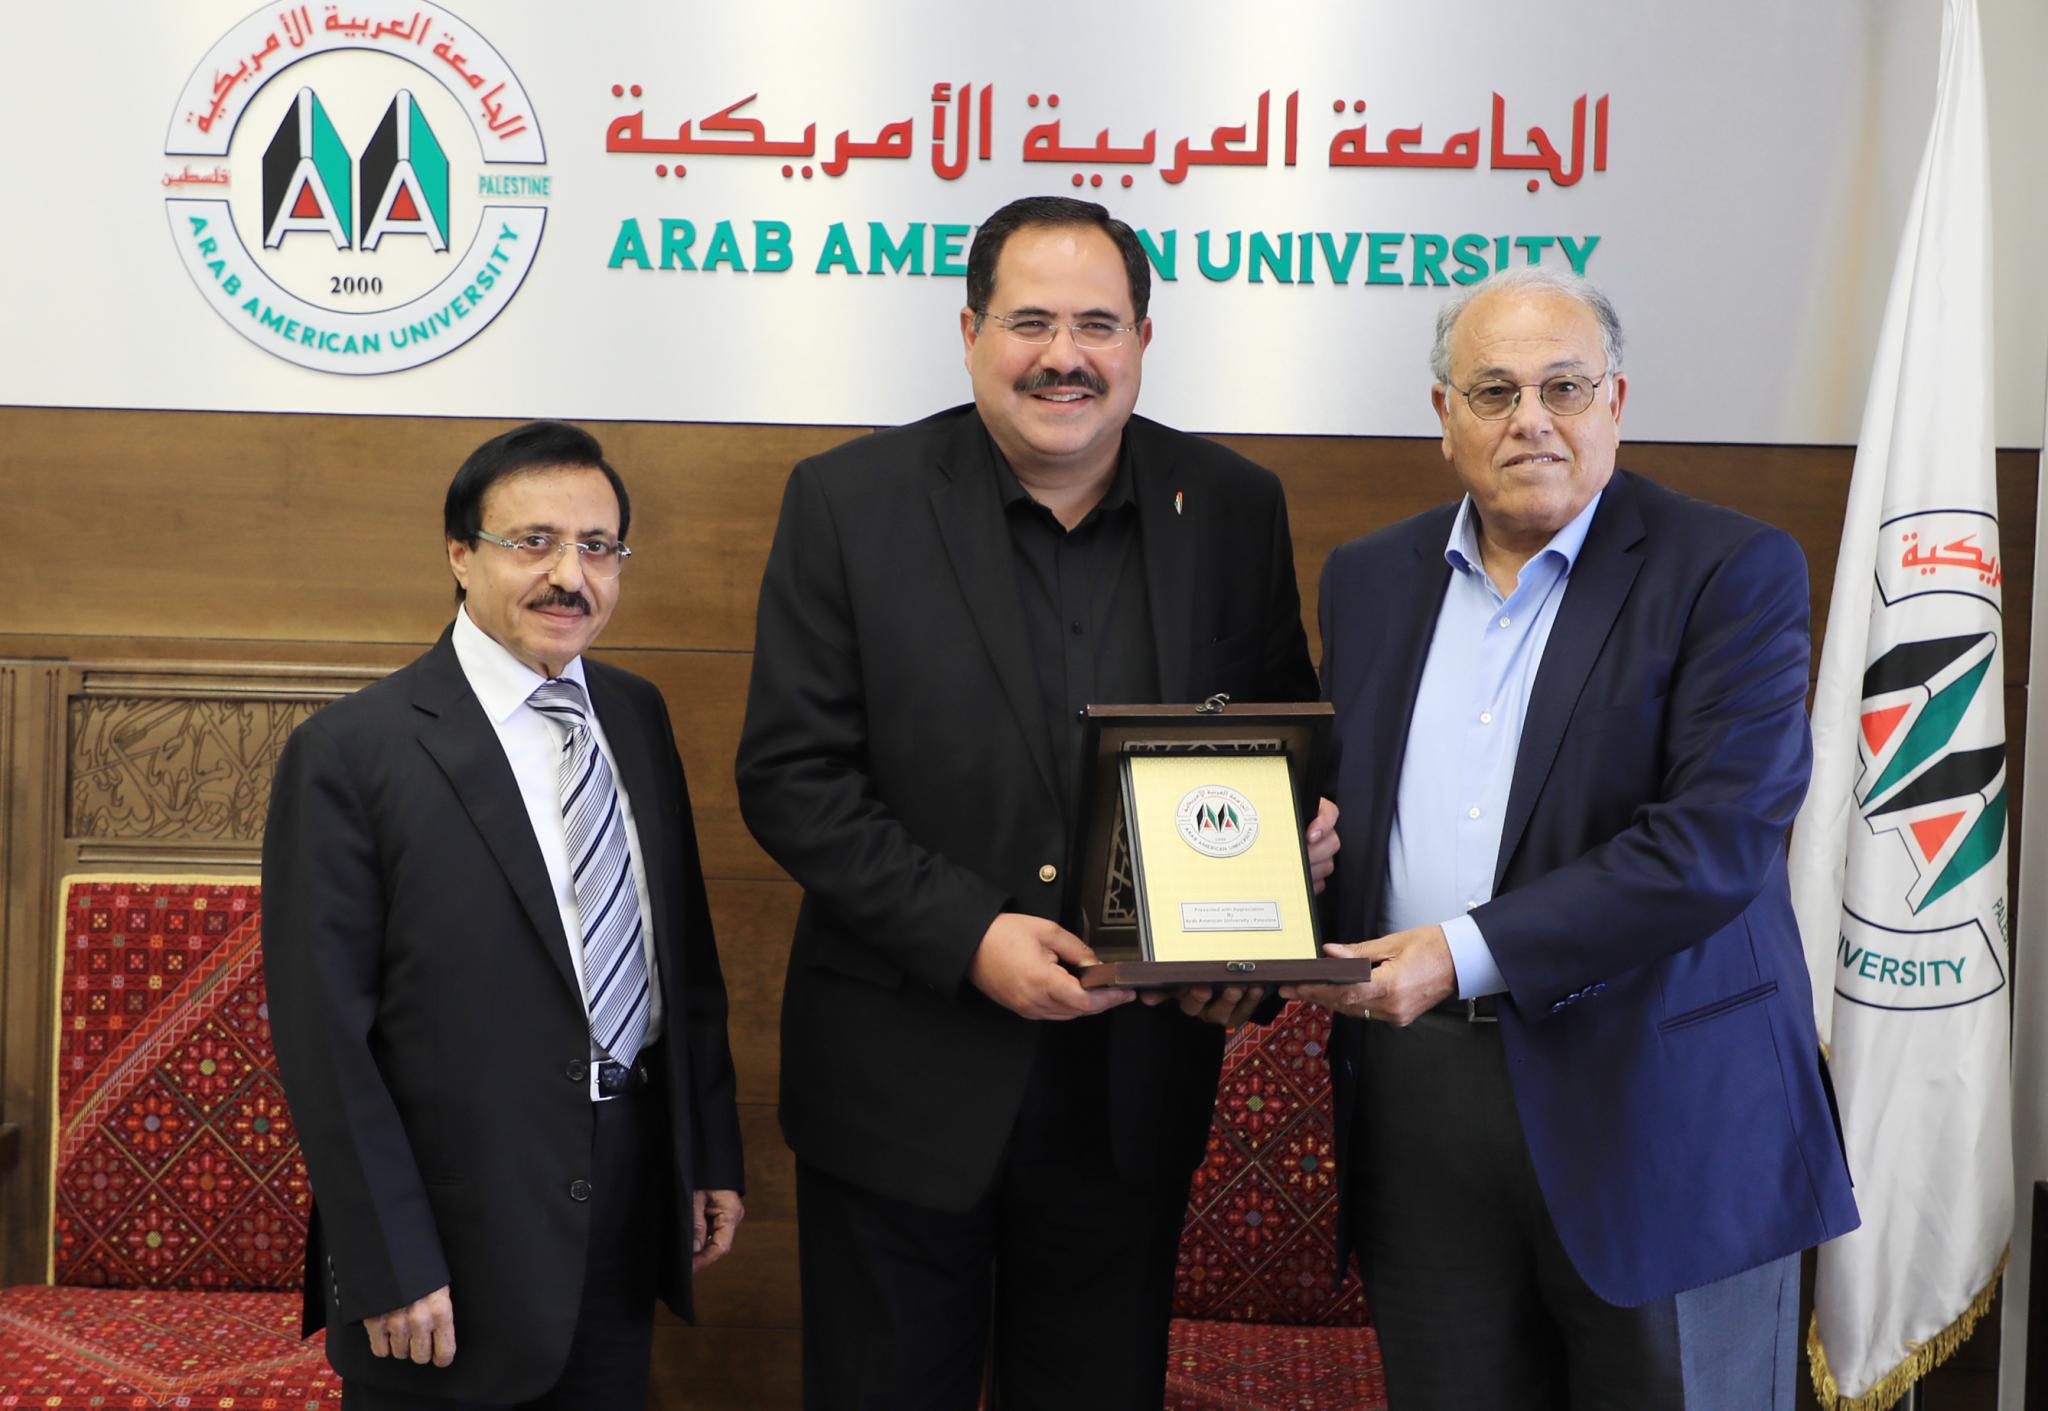 The University Honors Dr. Sabri Saidum for His Efforts in Develop the Education Sector in Palestine